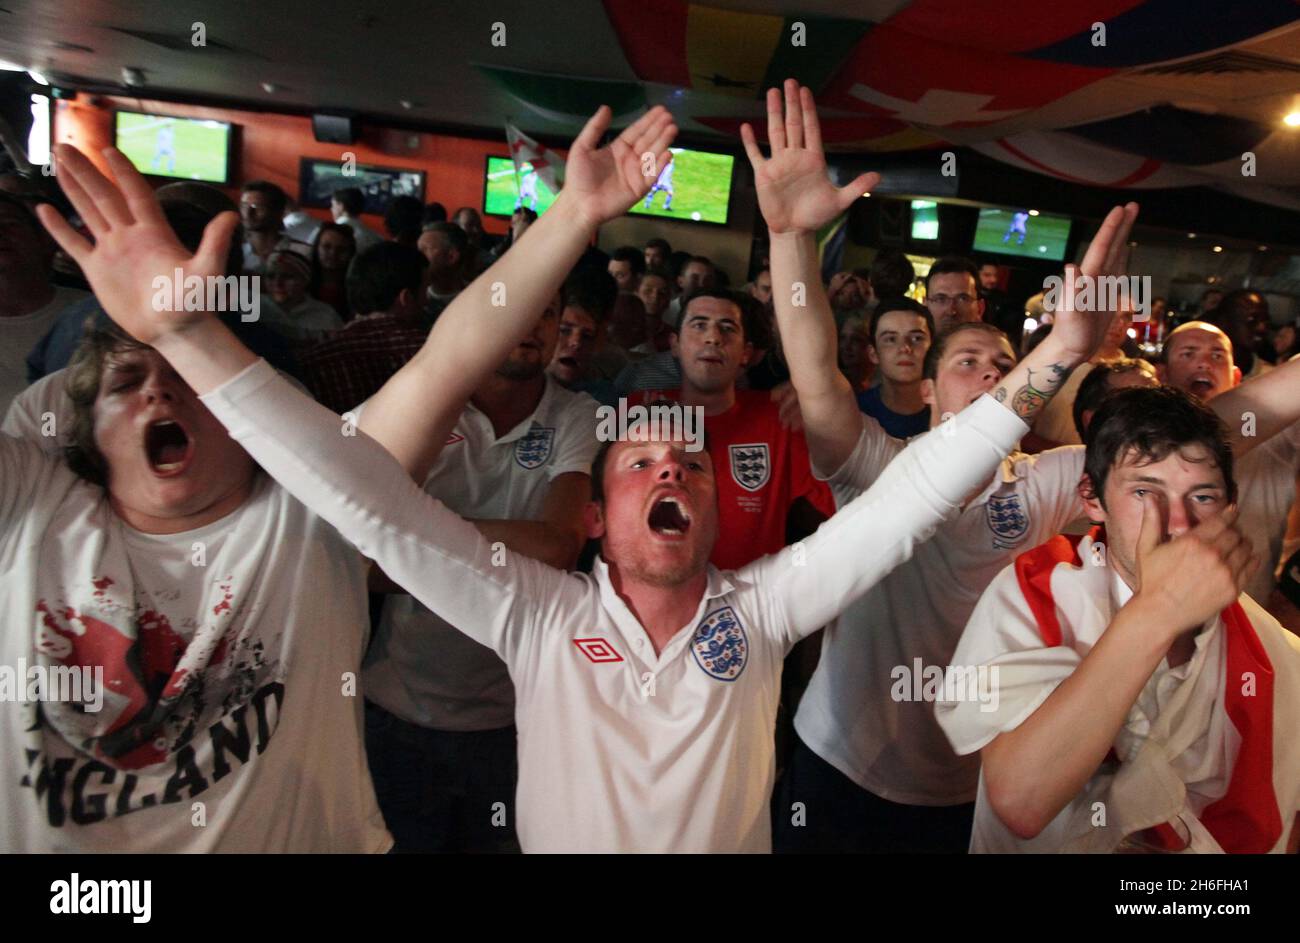 England football fans celebrate England's first goal at The Sports Cafe in London's Haymarket this afternoon Stock Photo